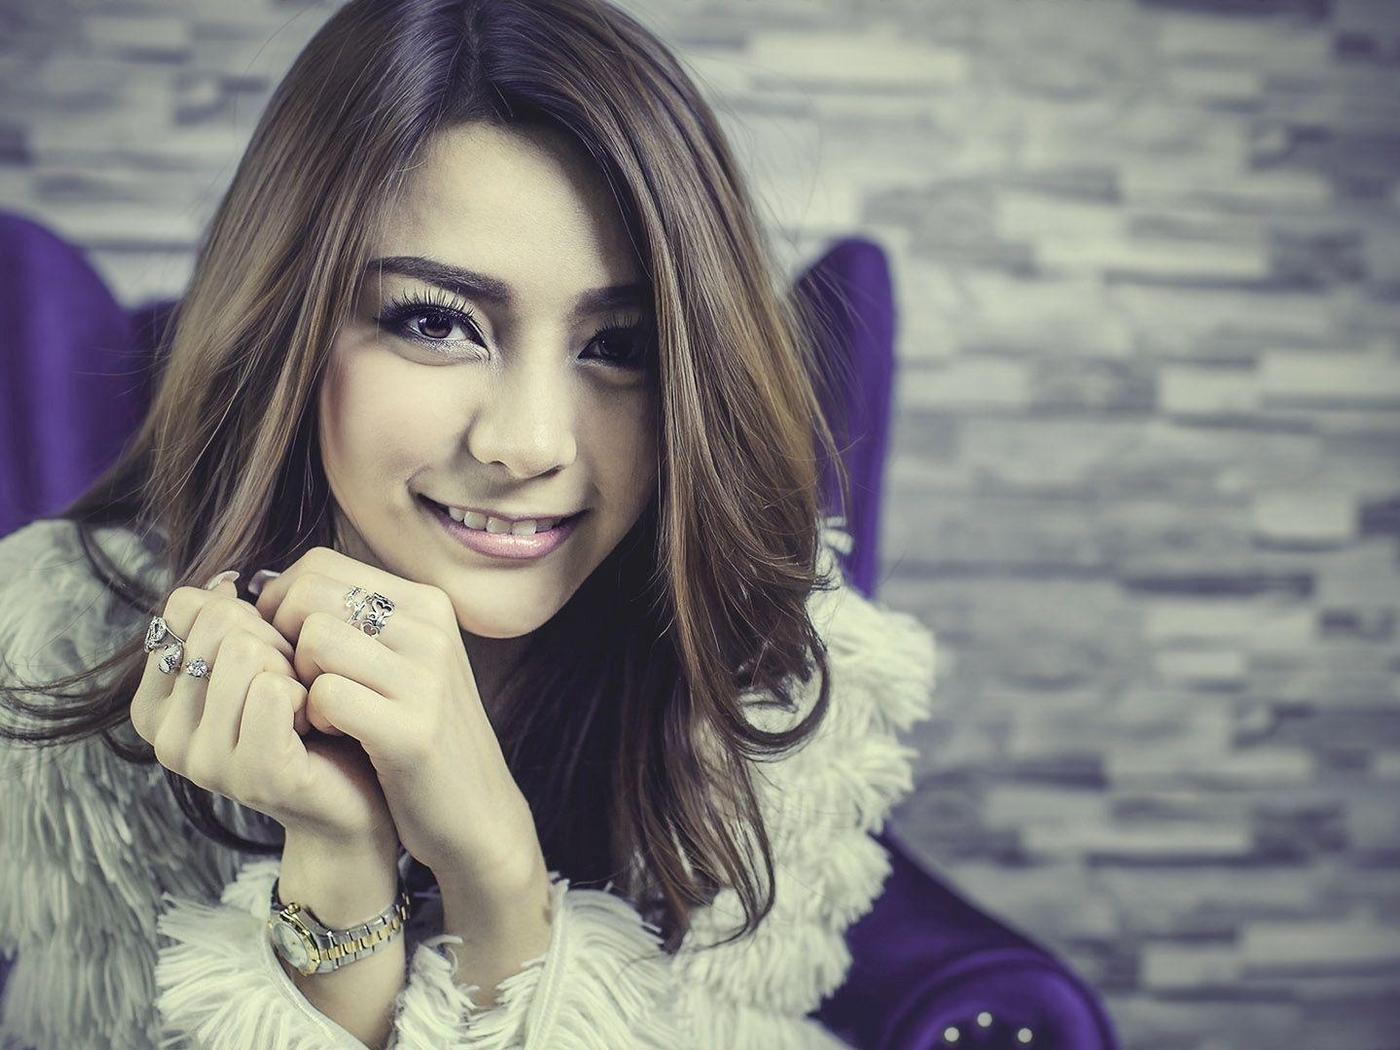 Image: Girl, smiling, asian, jewelry, watch, chair